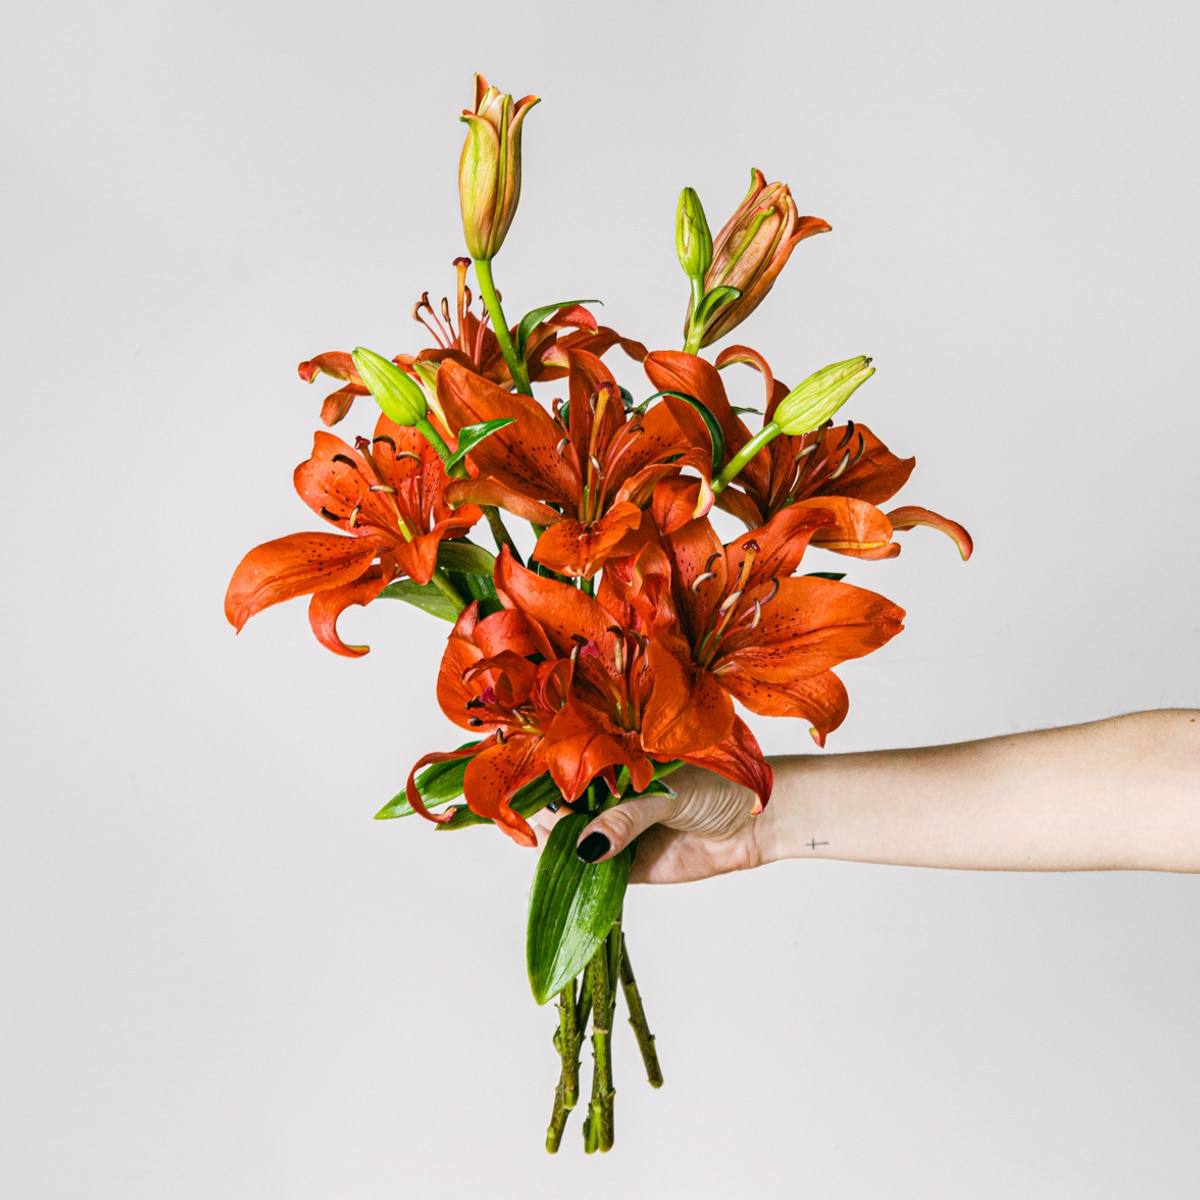 Hand holding red Asiatic lily flowers